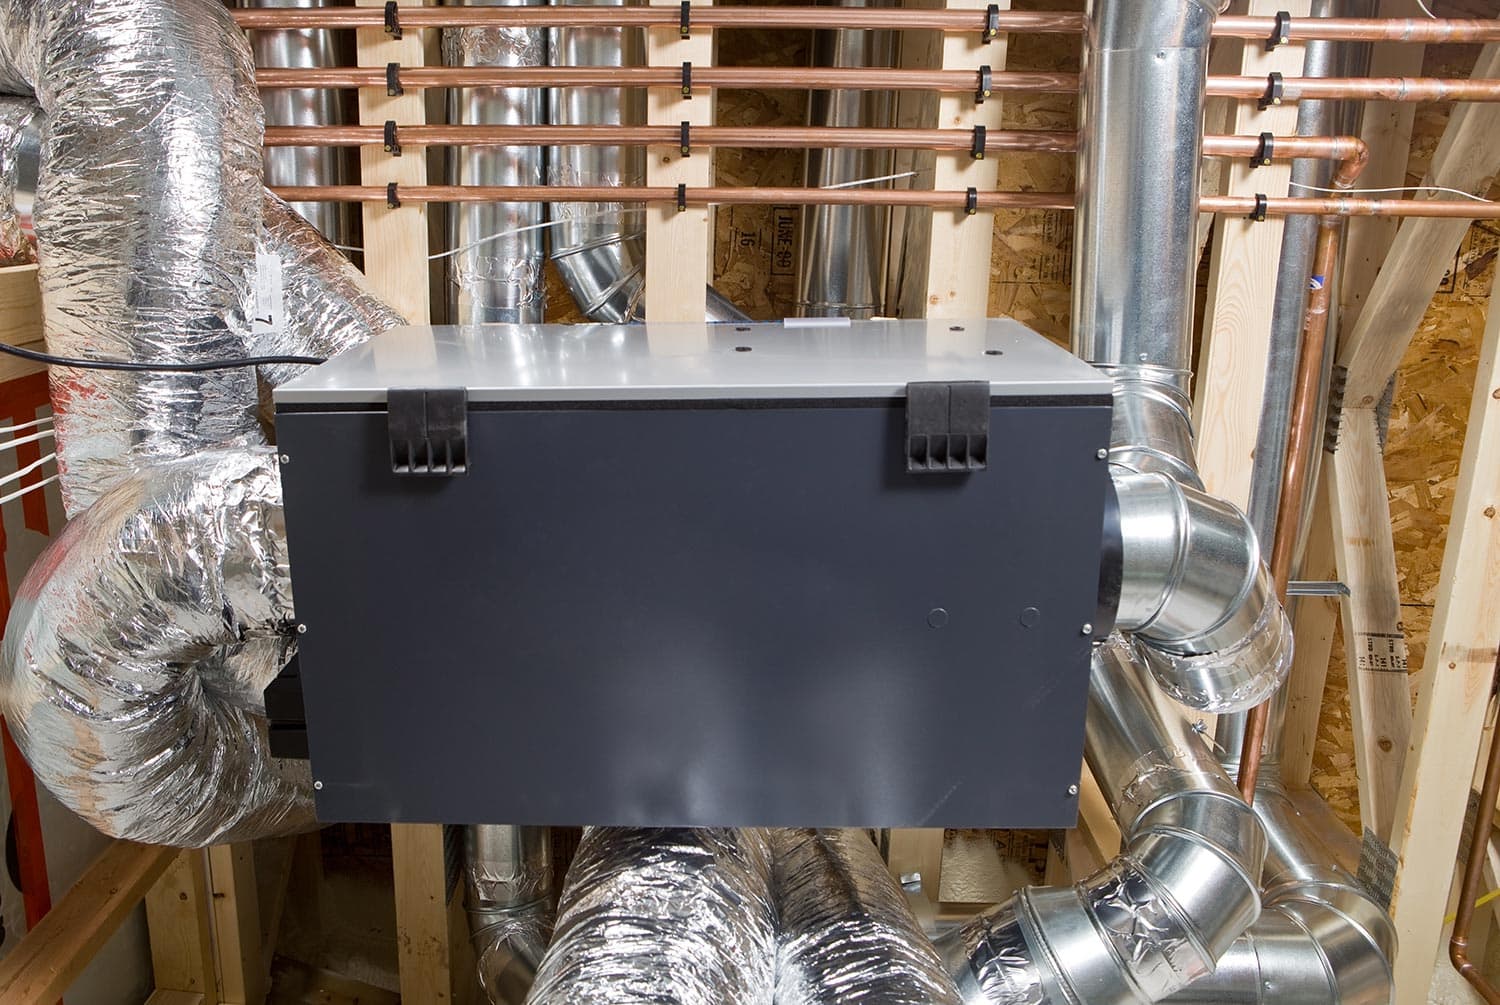 Residential air exchanger with complex duct work